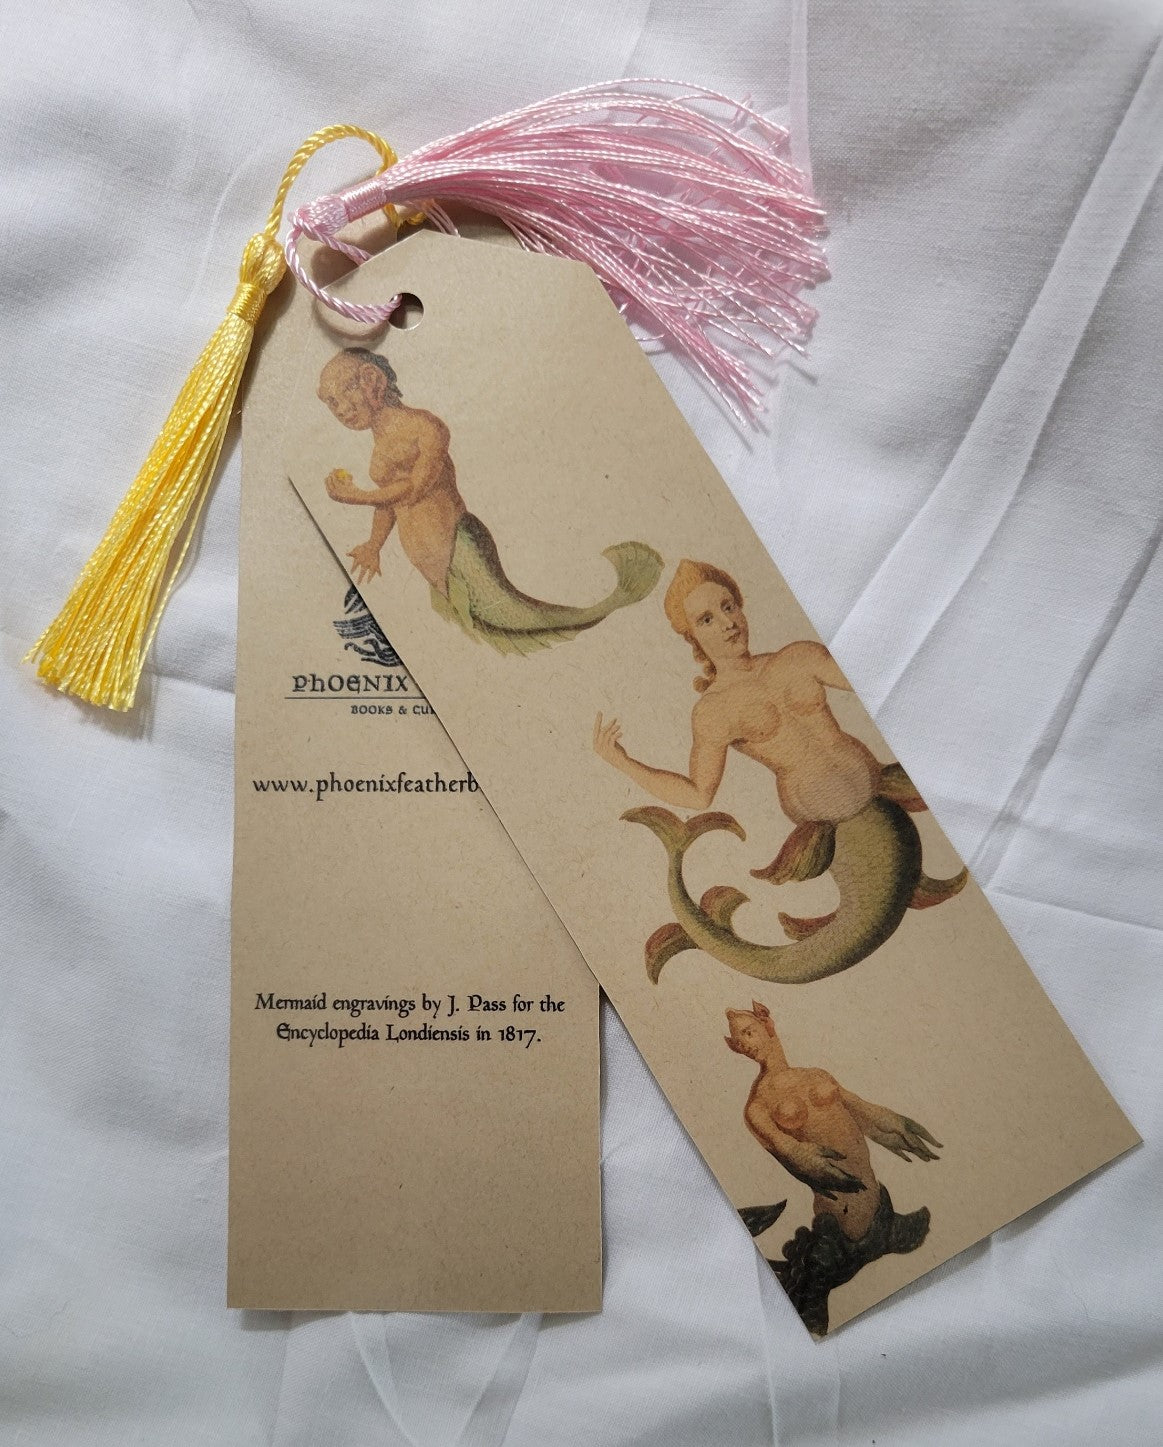 Handmade bookmark by Phoenix Feather Books & Curios, laminated bookmark, decorated with mermaid engravings from the Encyclopedia Londiensis, 1817.  Size: 2.25" x 7"